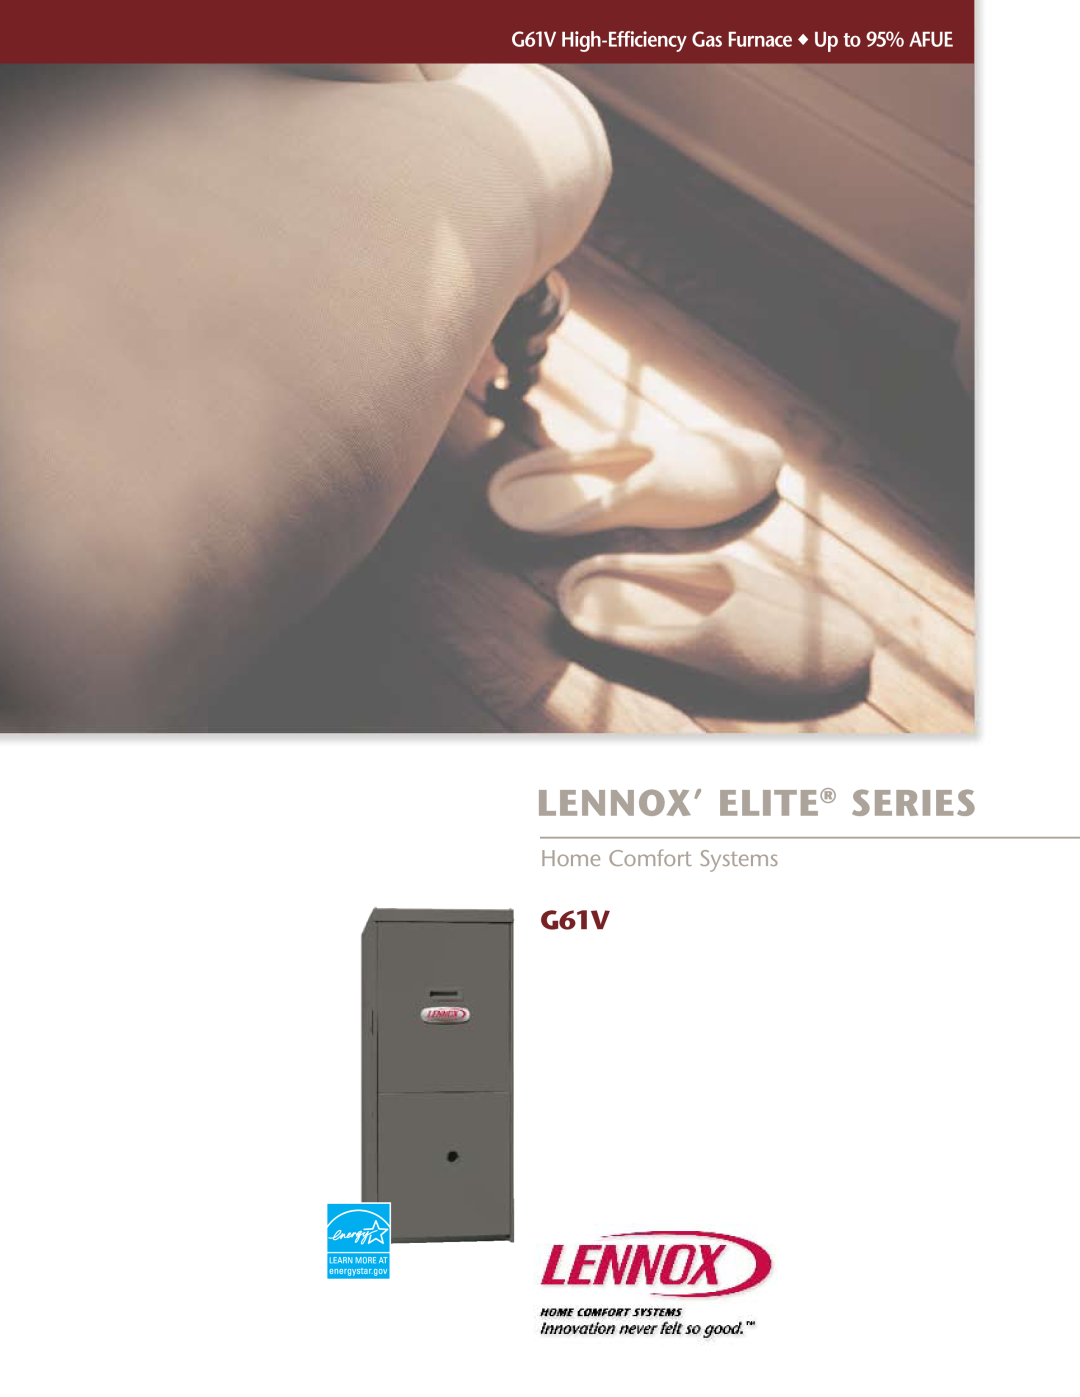 Lenoxx Electronics manual Lennox’ Elite Series, Home Comfort Systems, G61V High-EfficiencyGas Furnace Up to 95% AFUE 